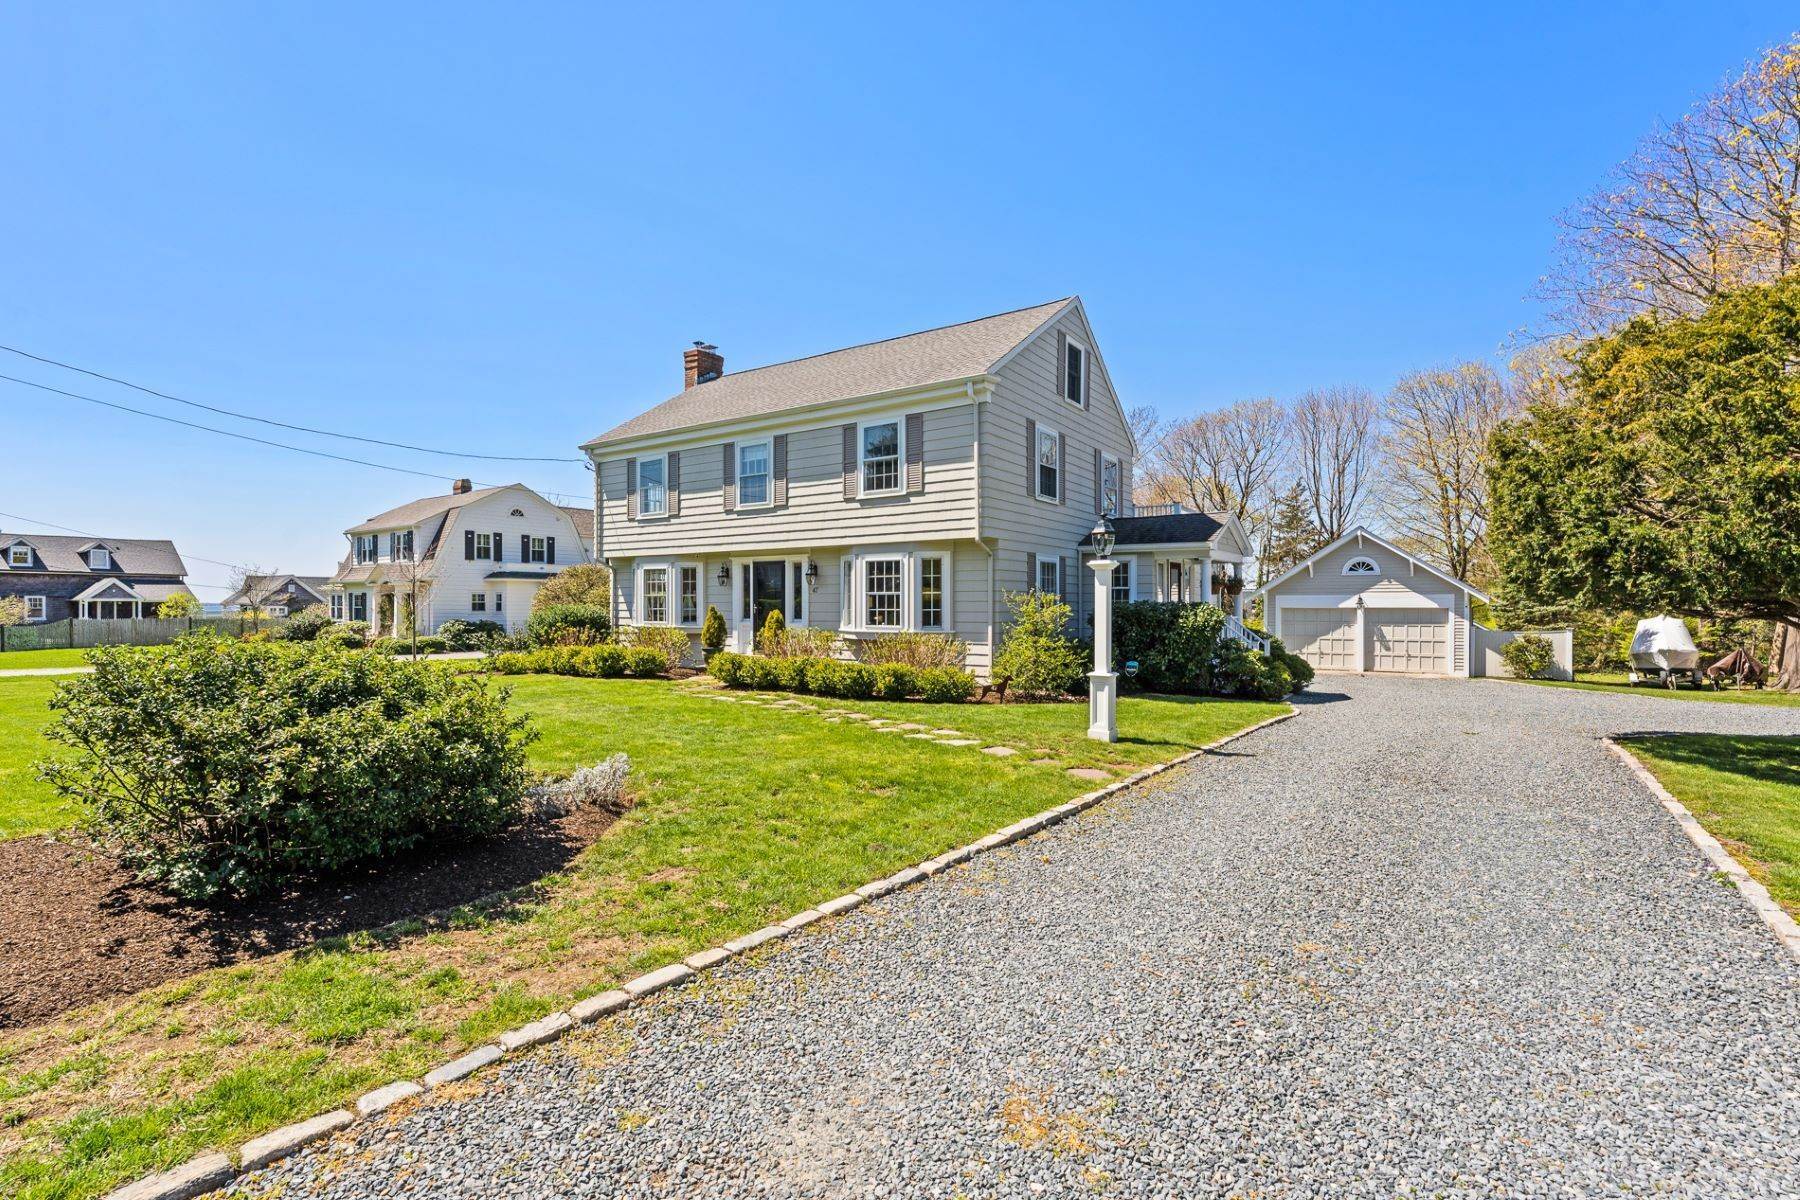 Other Residential Homes for Sale at 47 BLUFF RD Barrington, Rhode Island 02806 United States